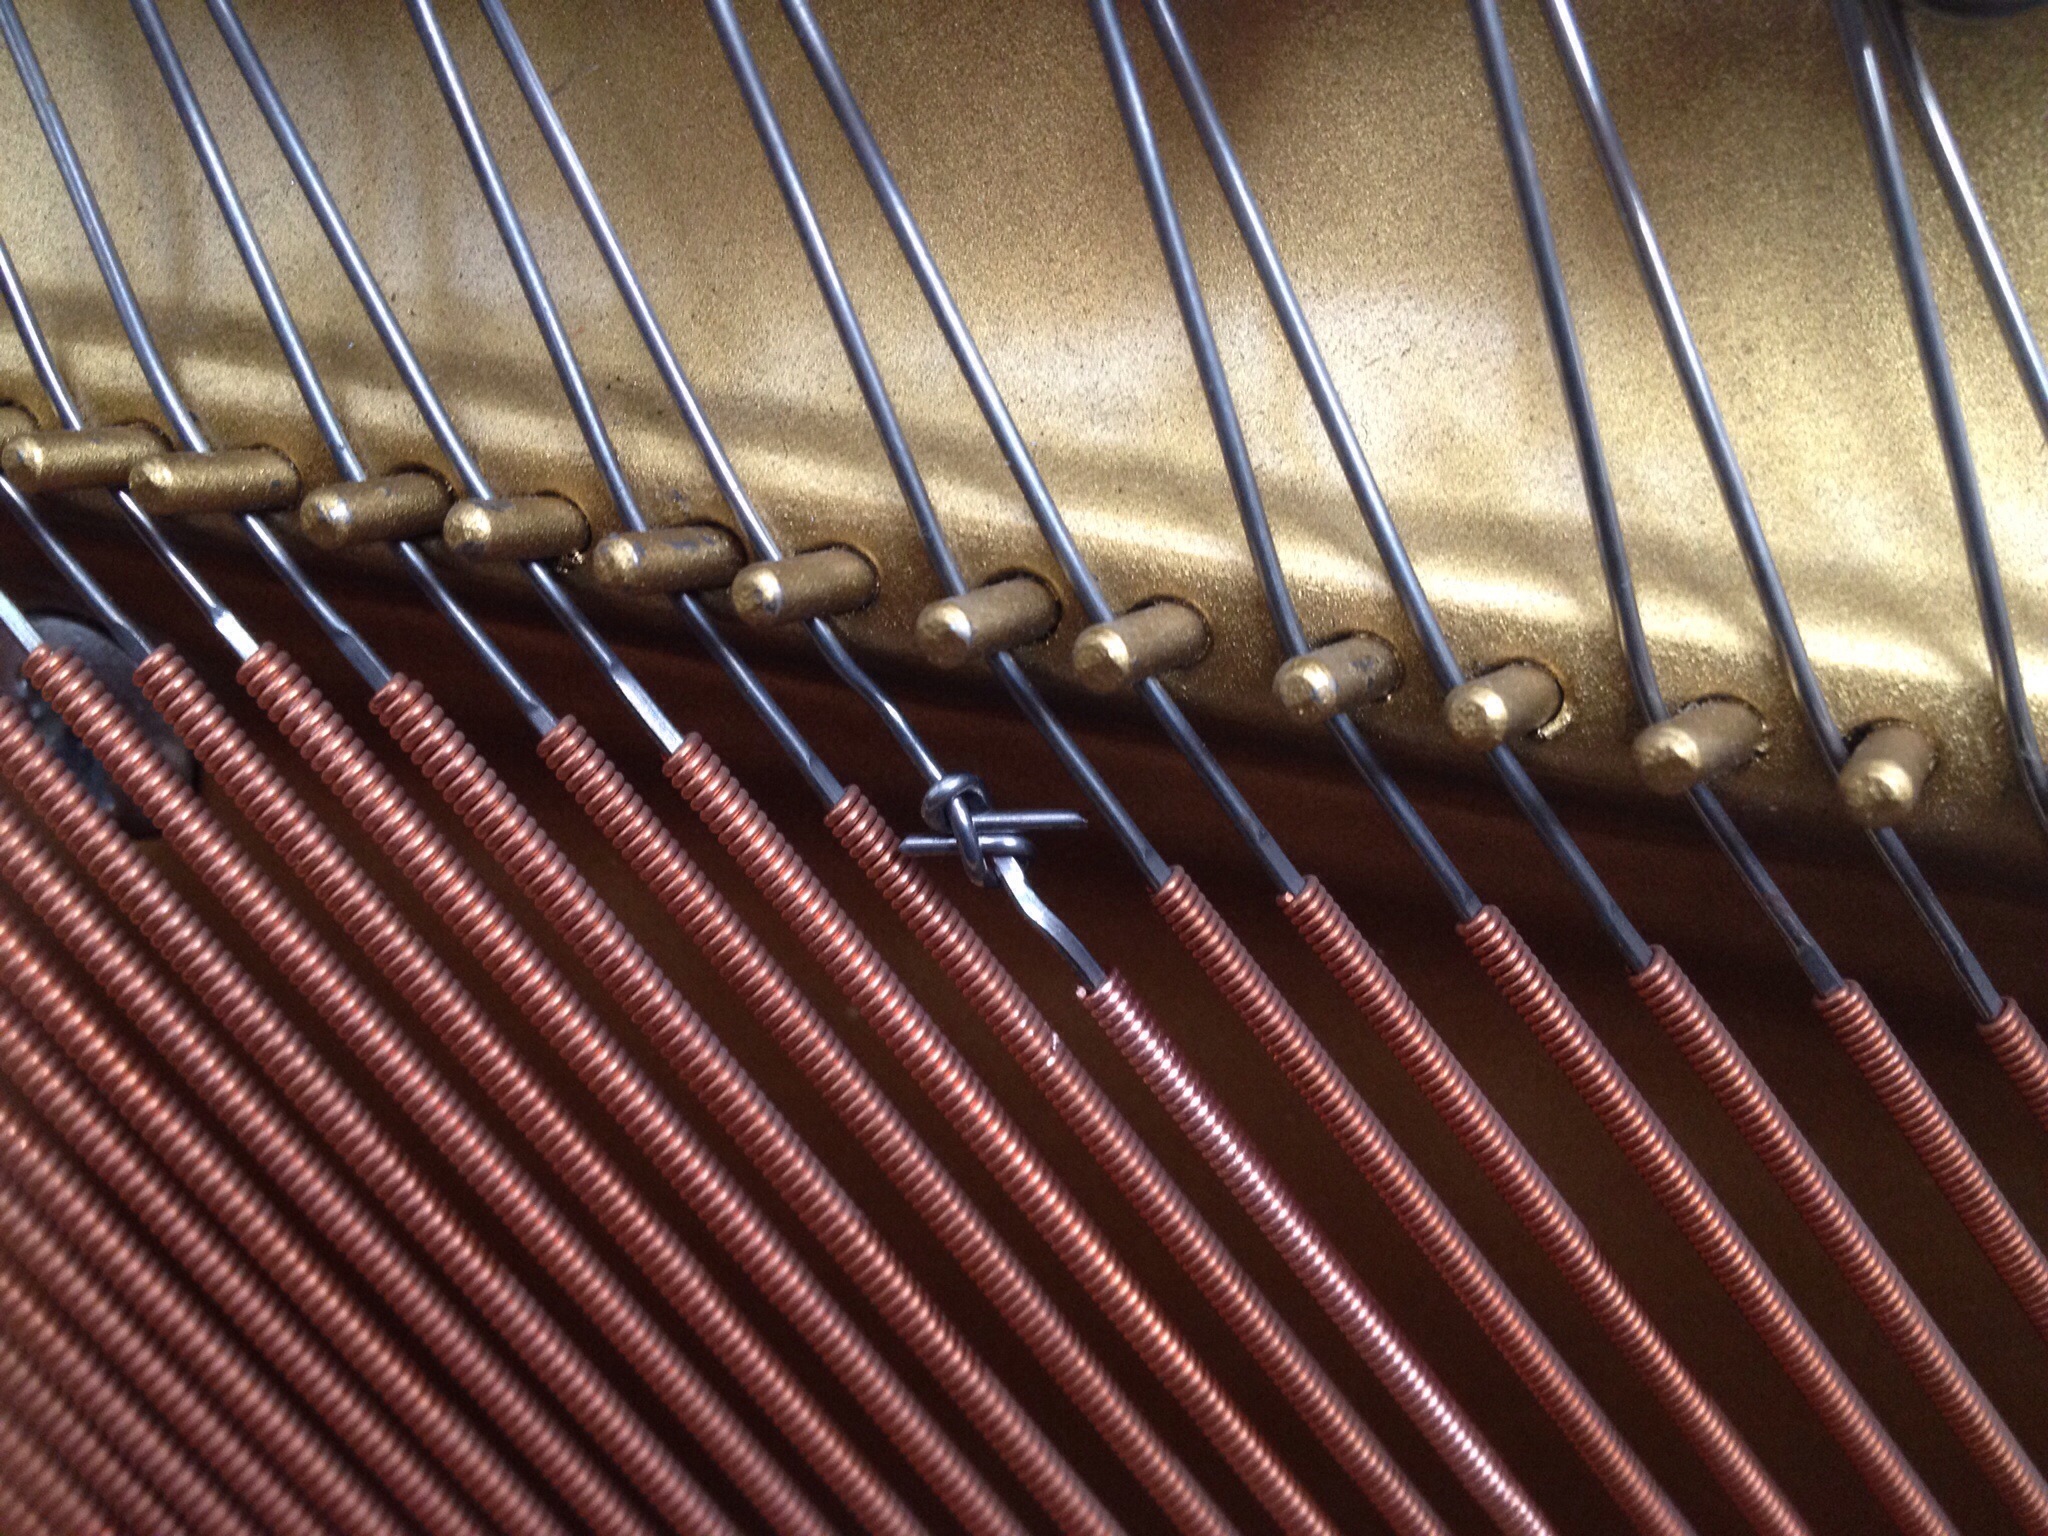 String Splicing - The Gilded Piano